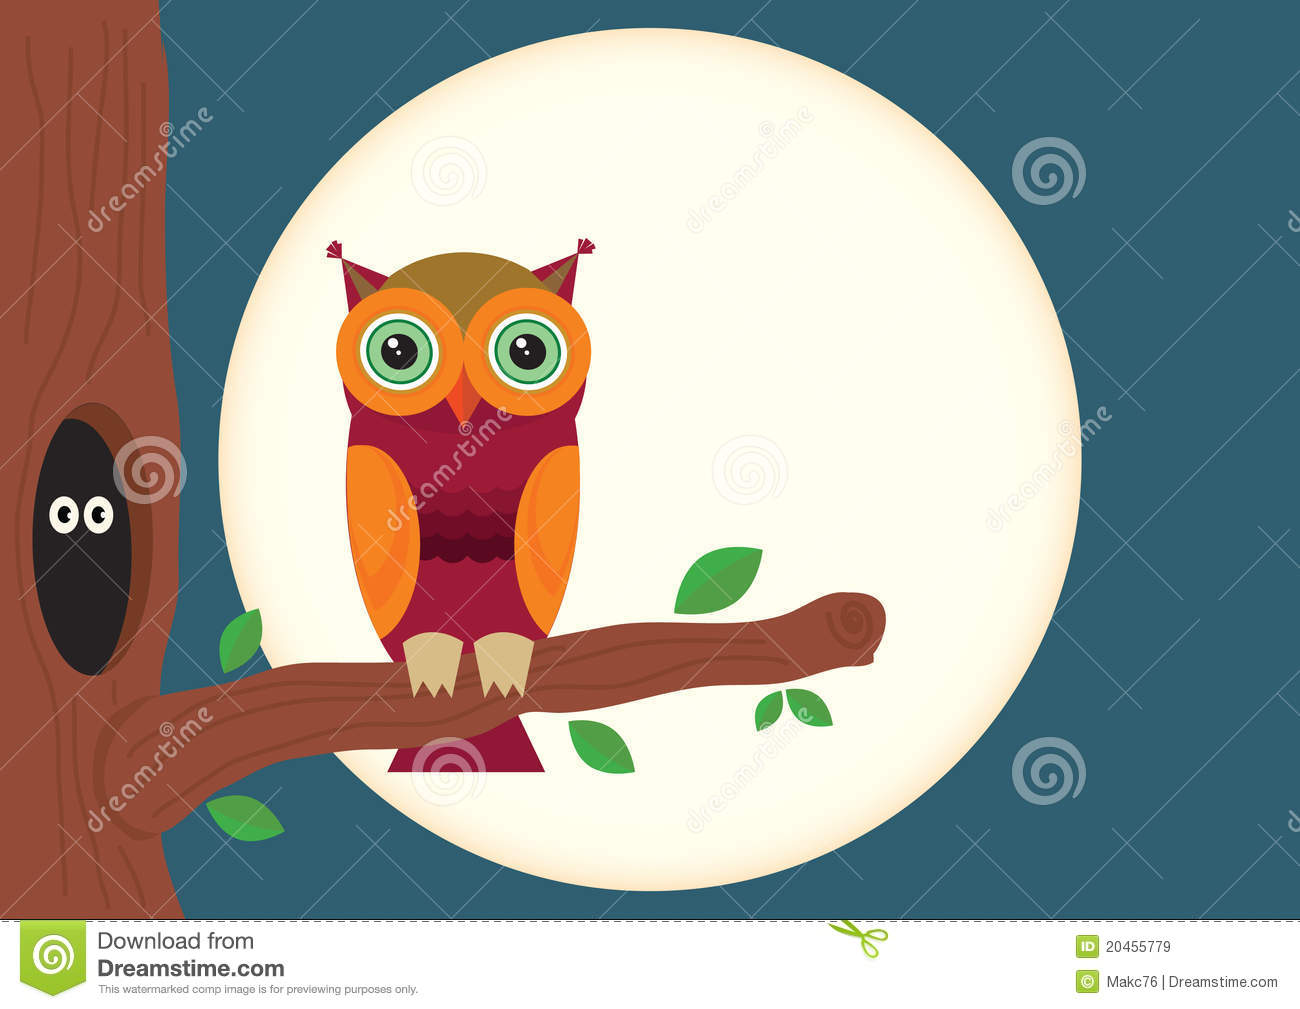 Cartoon Owl  Owl And Moon Are On Separate Layers